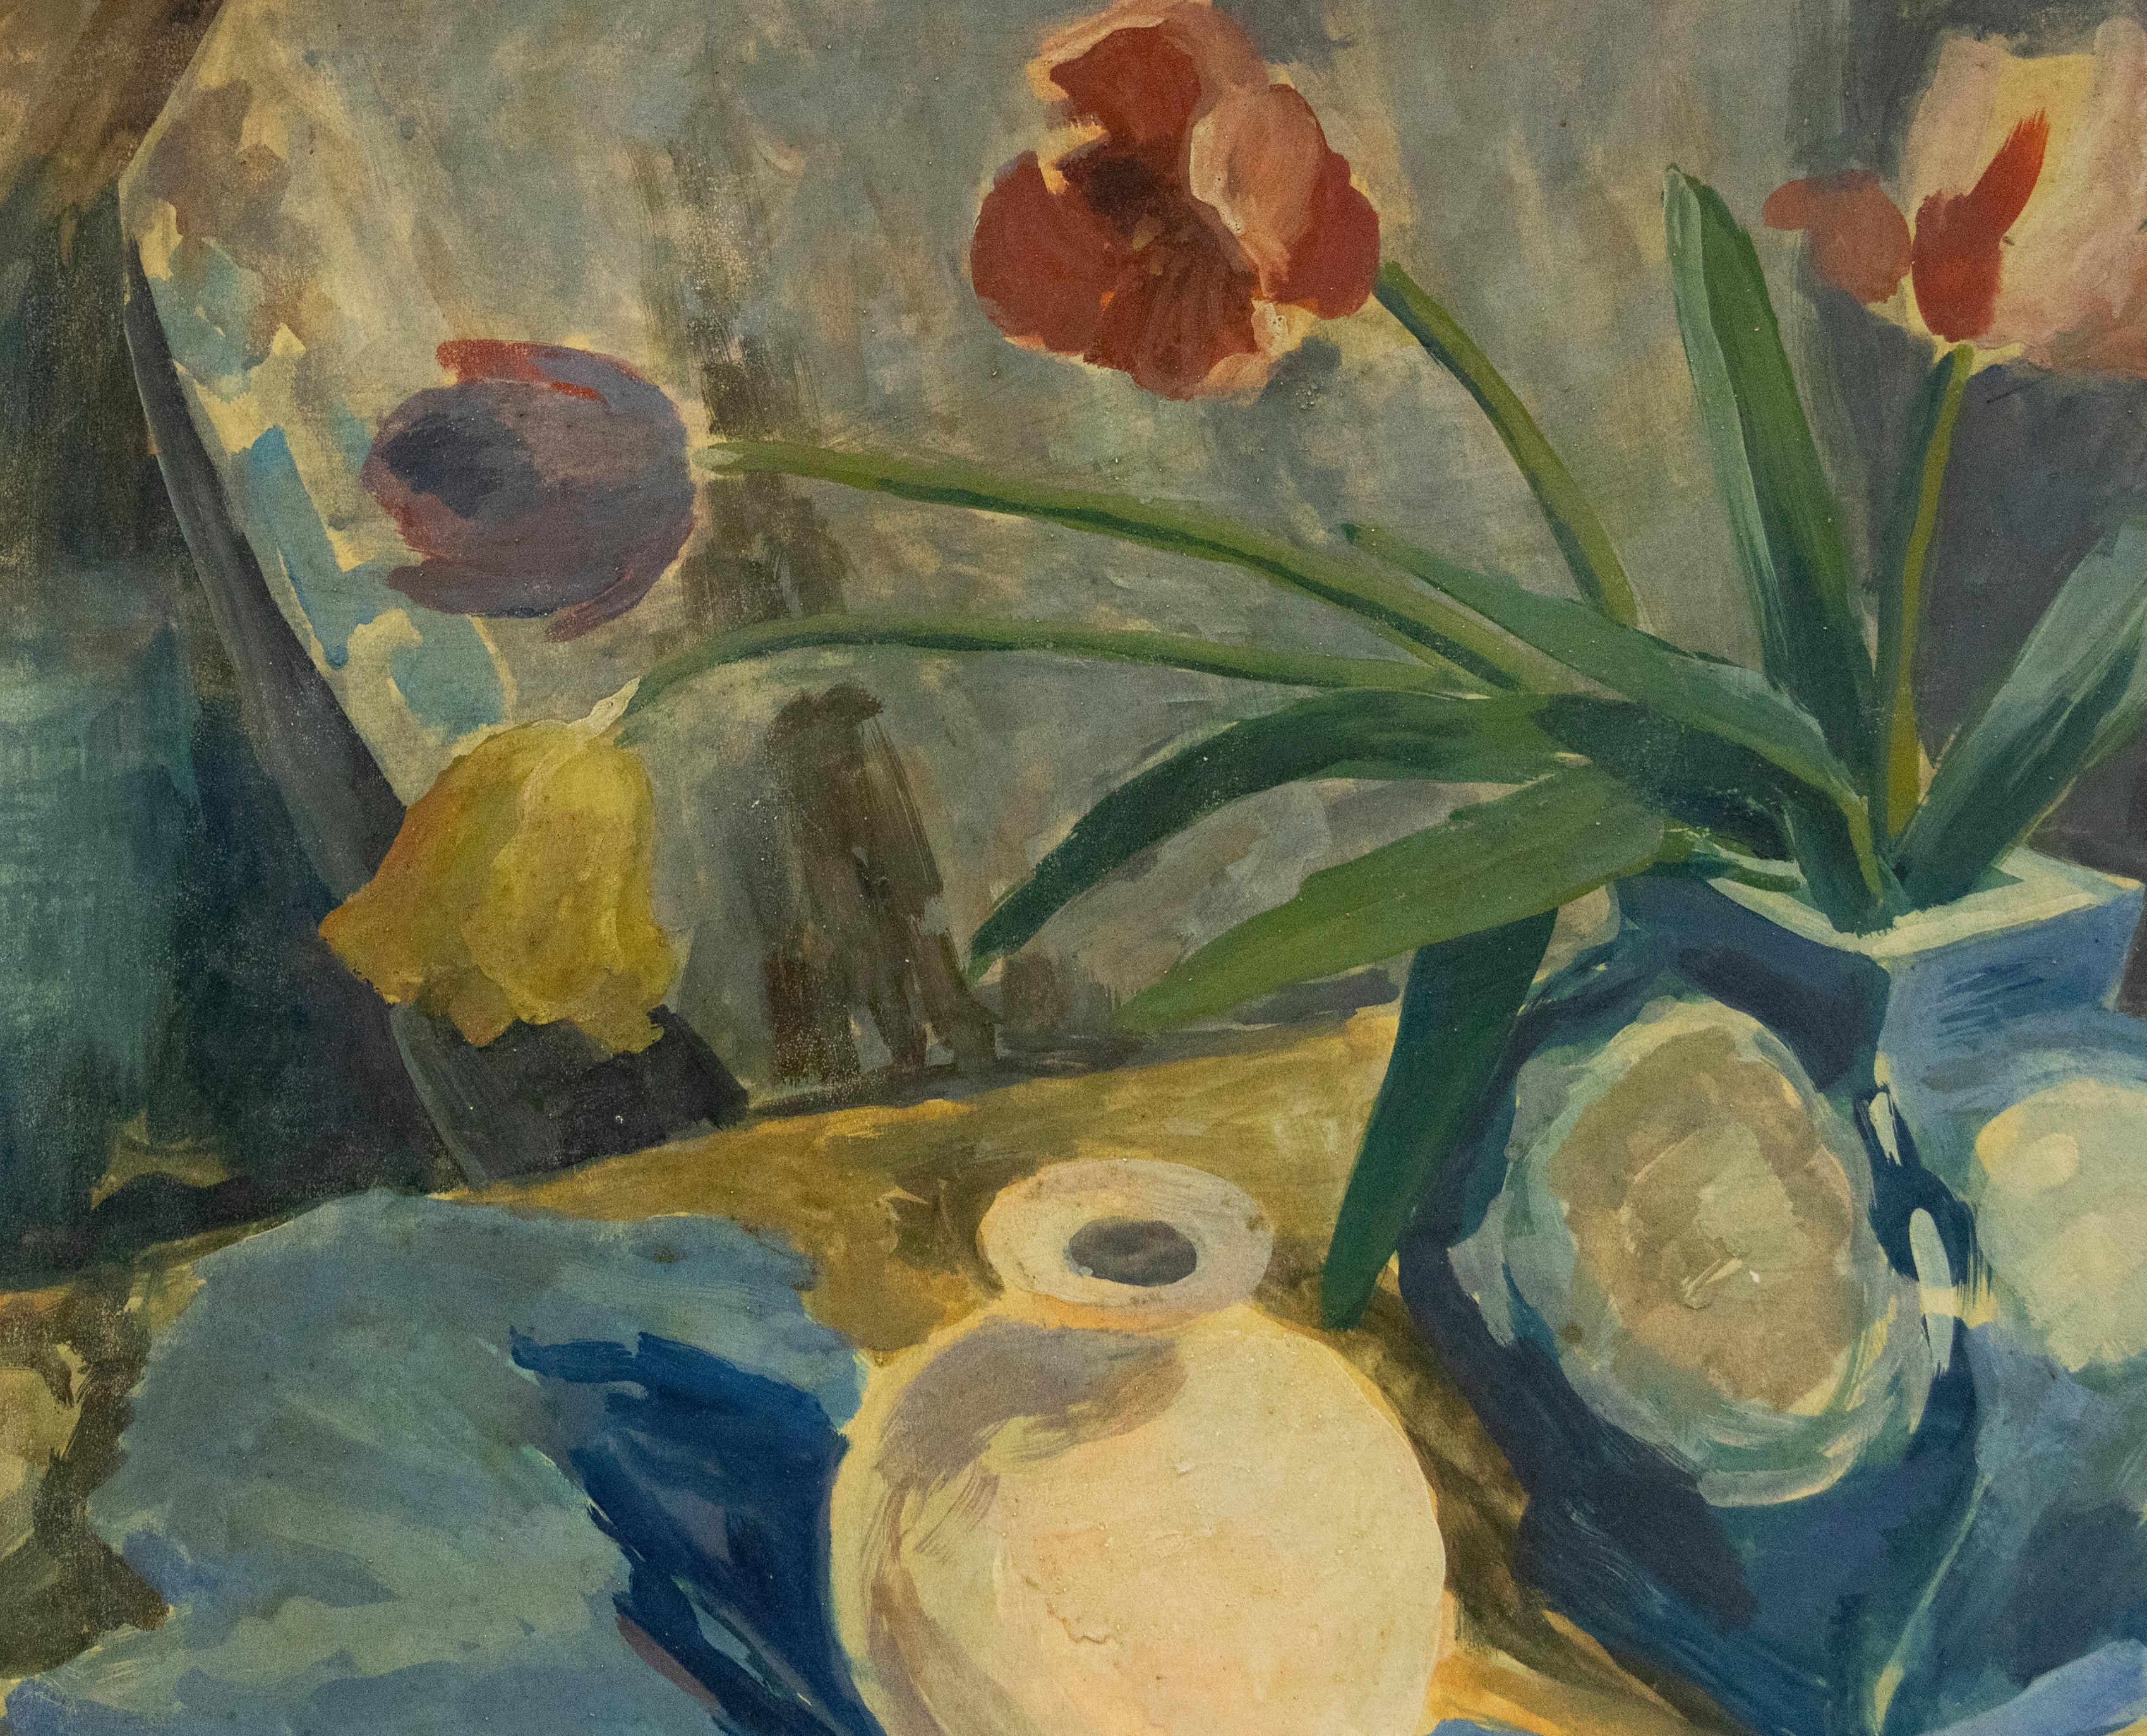 A wonderful still life study depicting a ceramic vase filled with tulips. The muted colour palette and gestural brushwork gives a nod towards Bloomsbury School style which often saw compositions focused around every objects and flowers. The artist